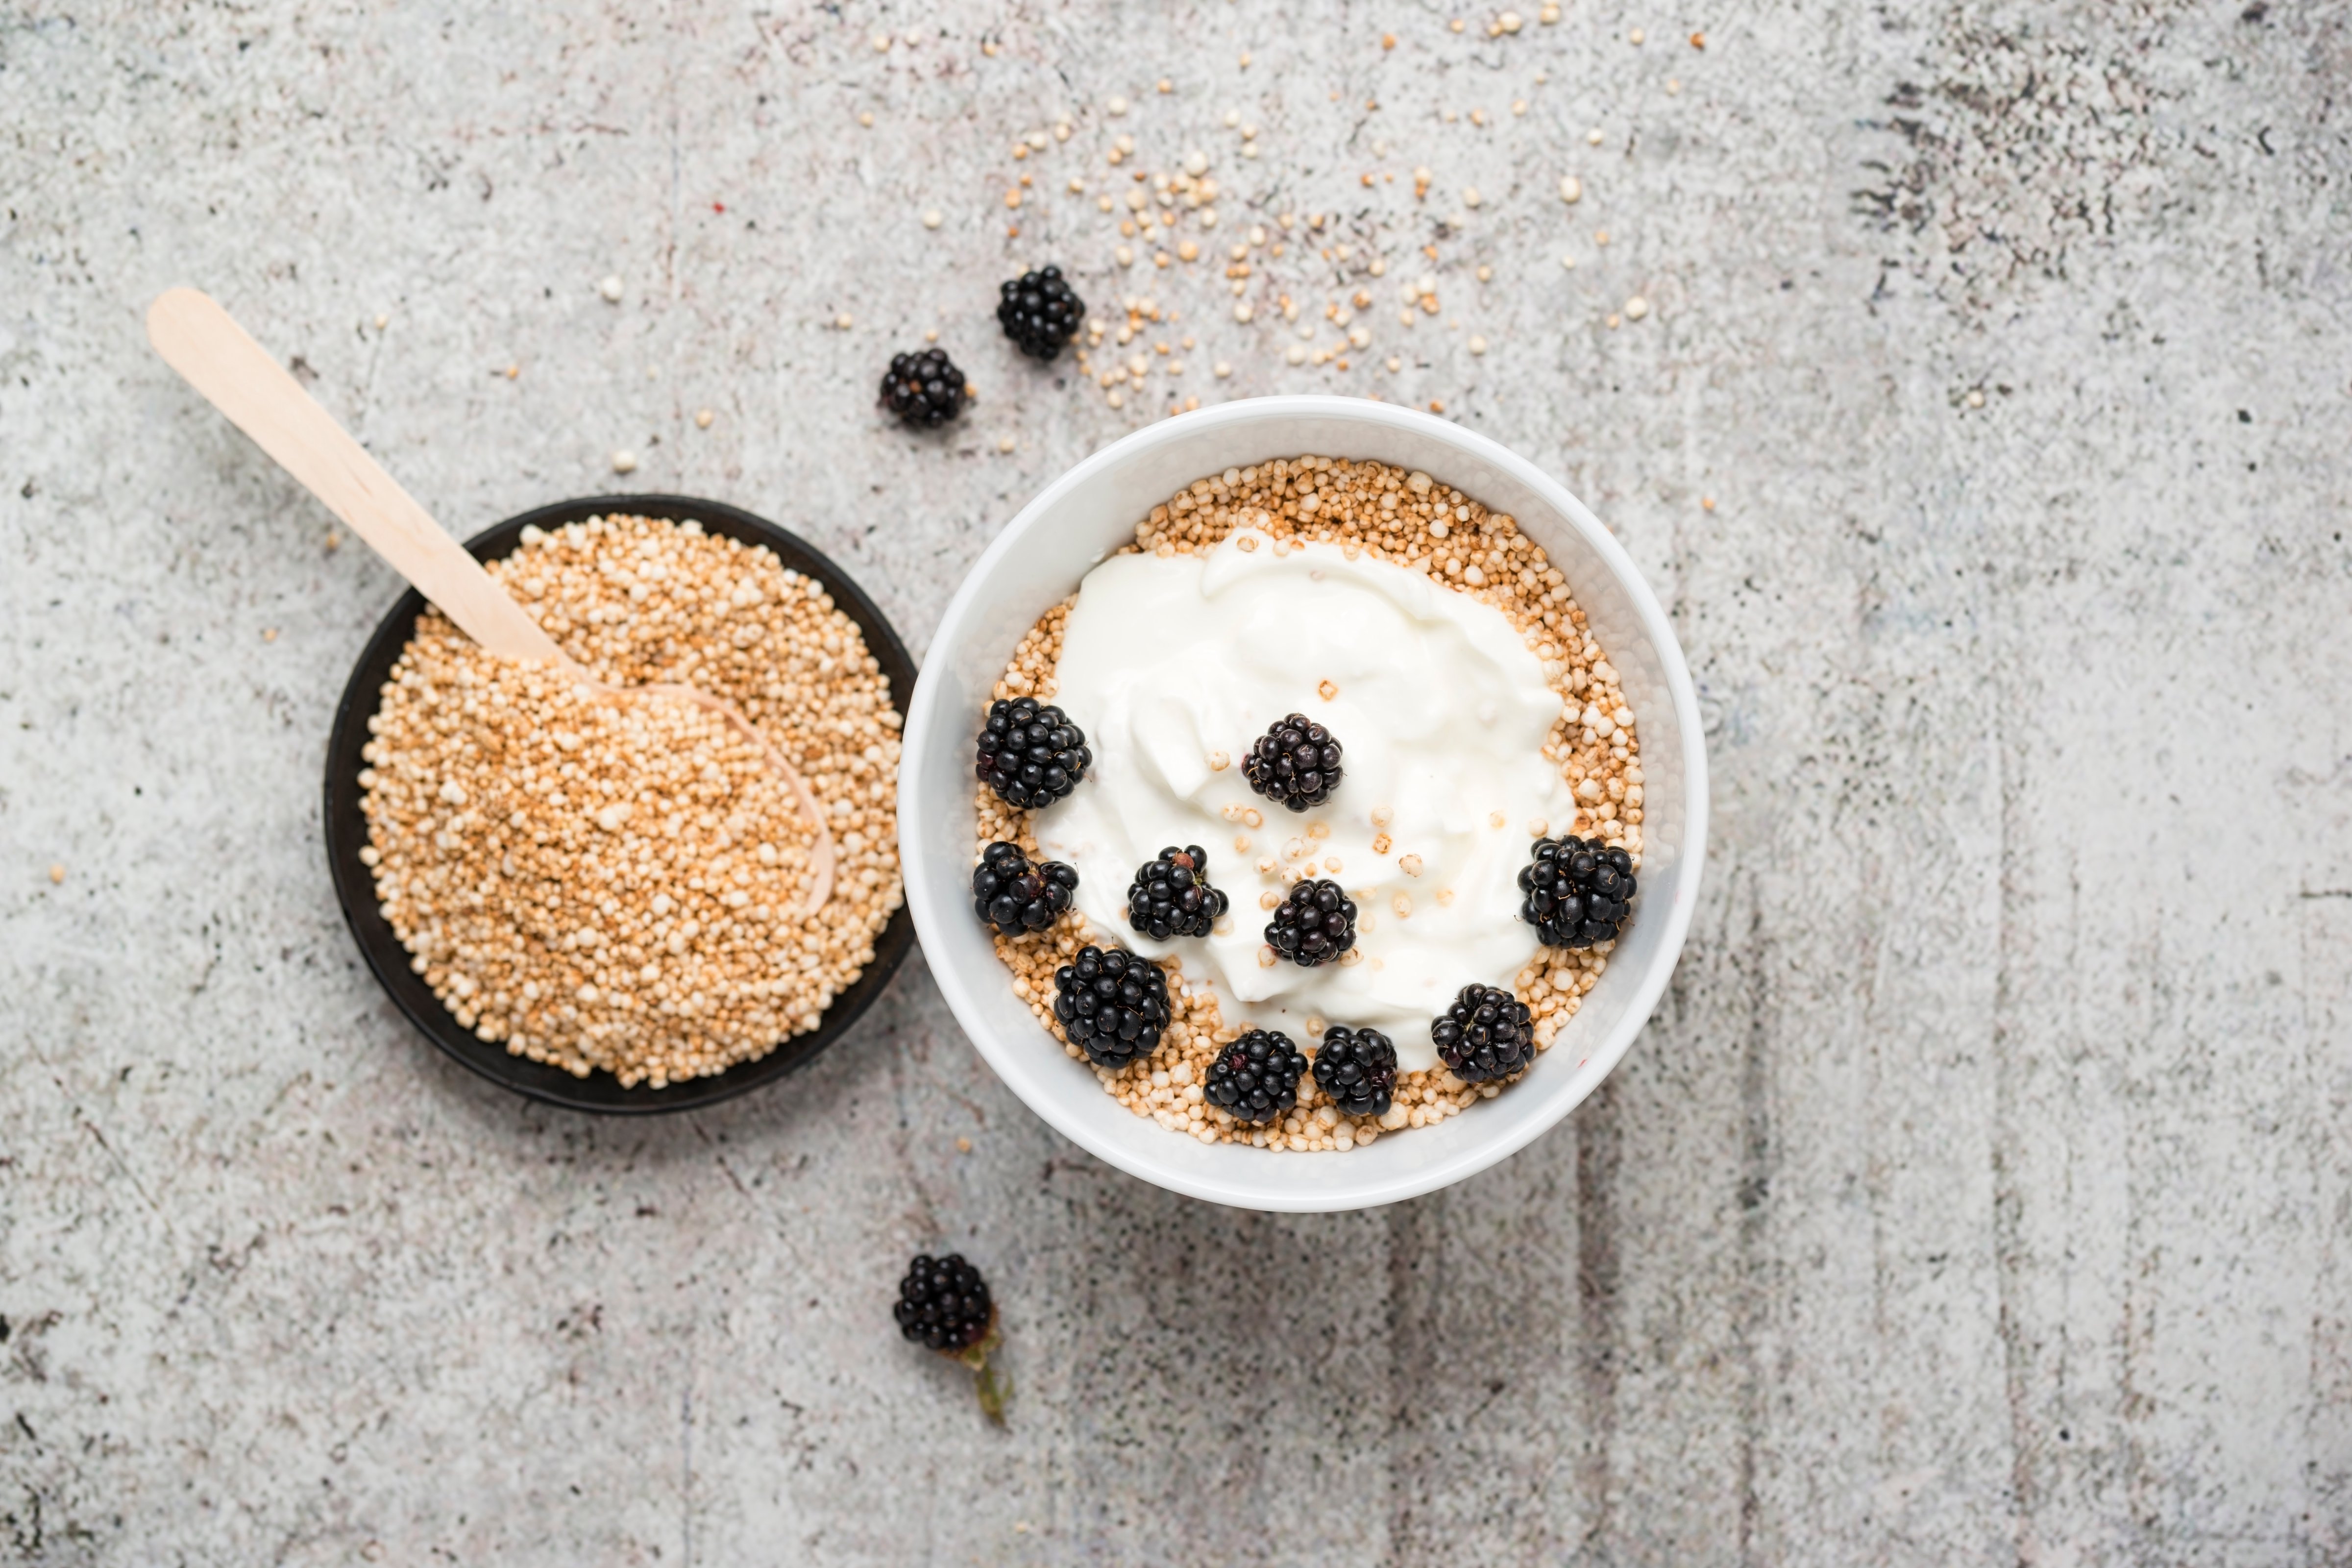 Wholemeal quinoa, popped quinoa with yogurt and blackberries (Getty Images)